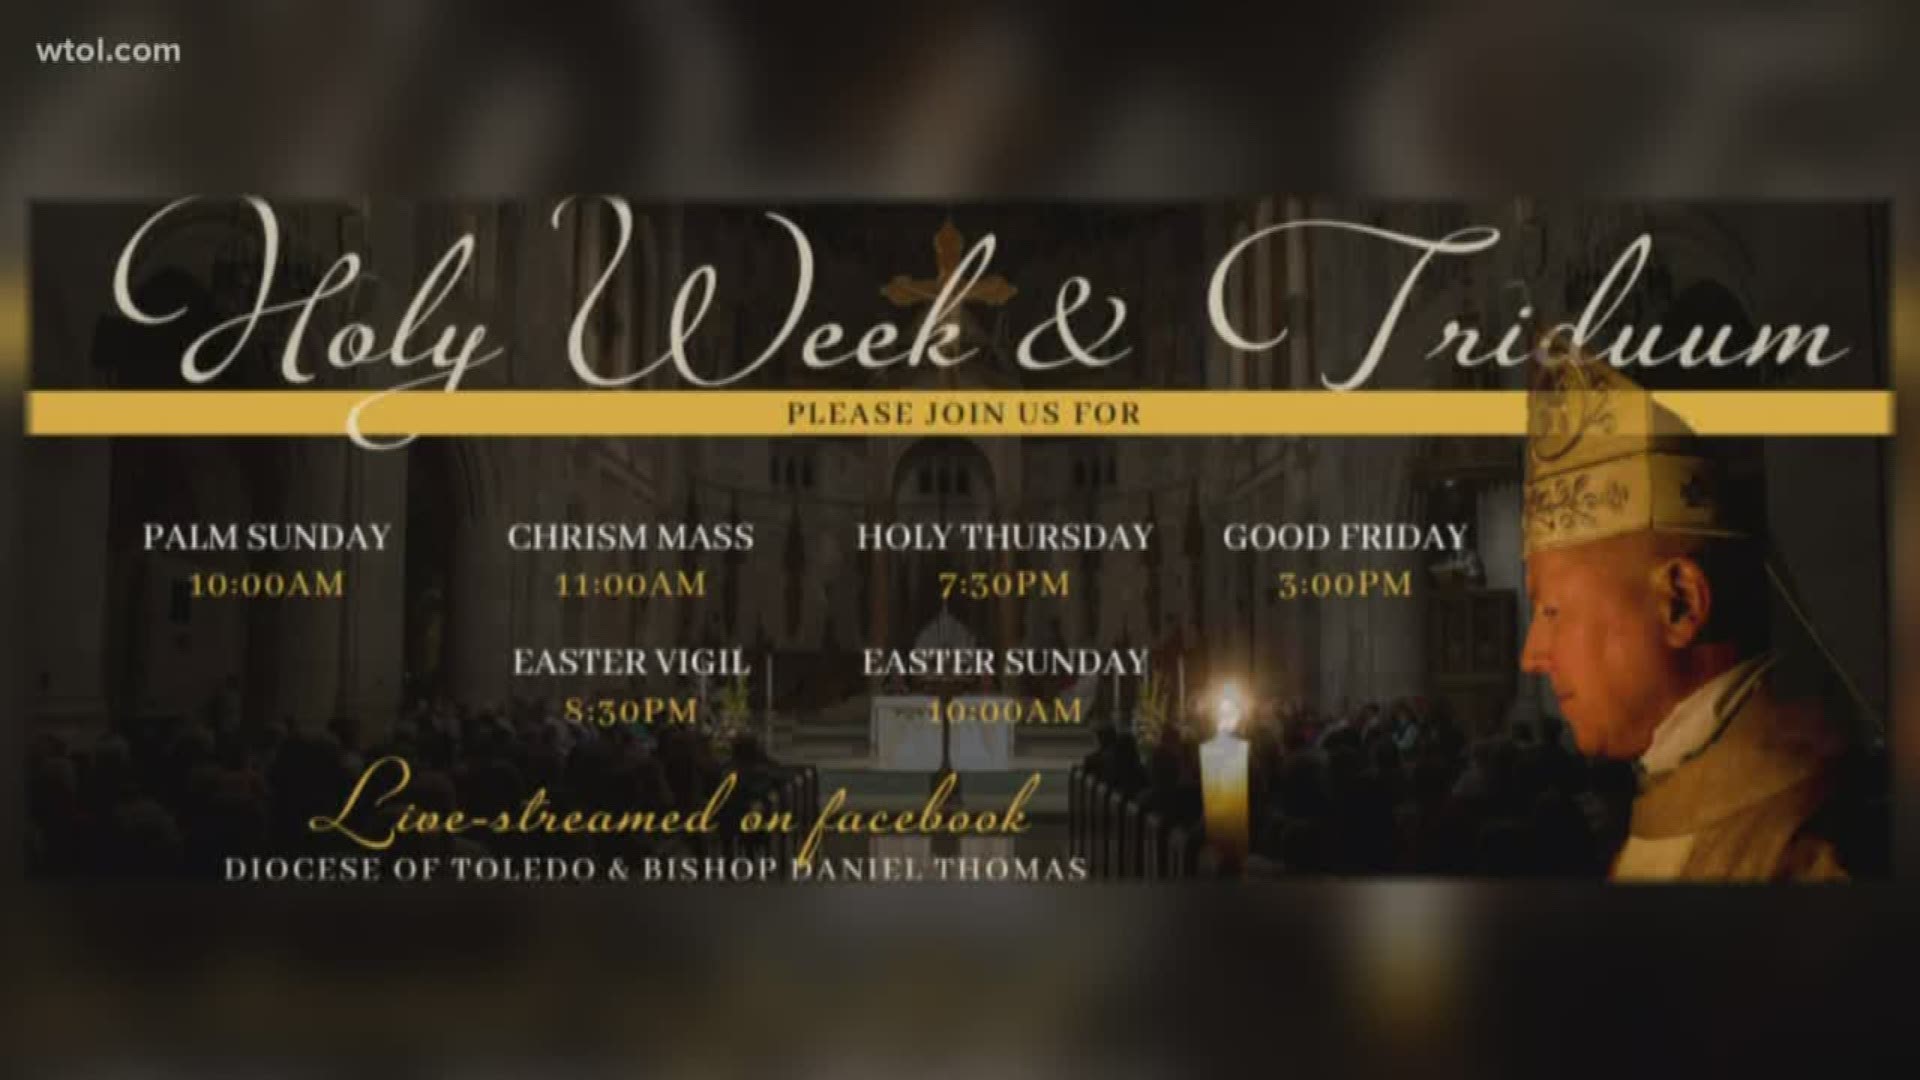 Bishop Daniel Thomas tells Catholics they don't have to go to church to experience Holy Week and remember what it means.